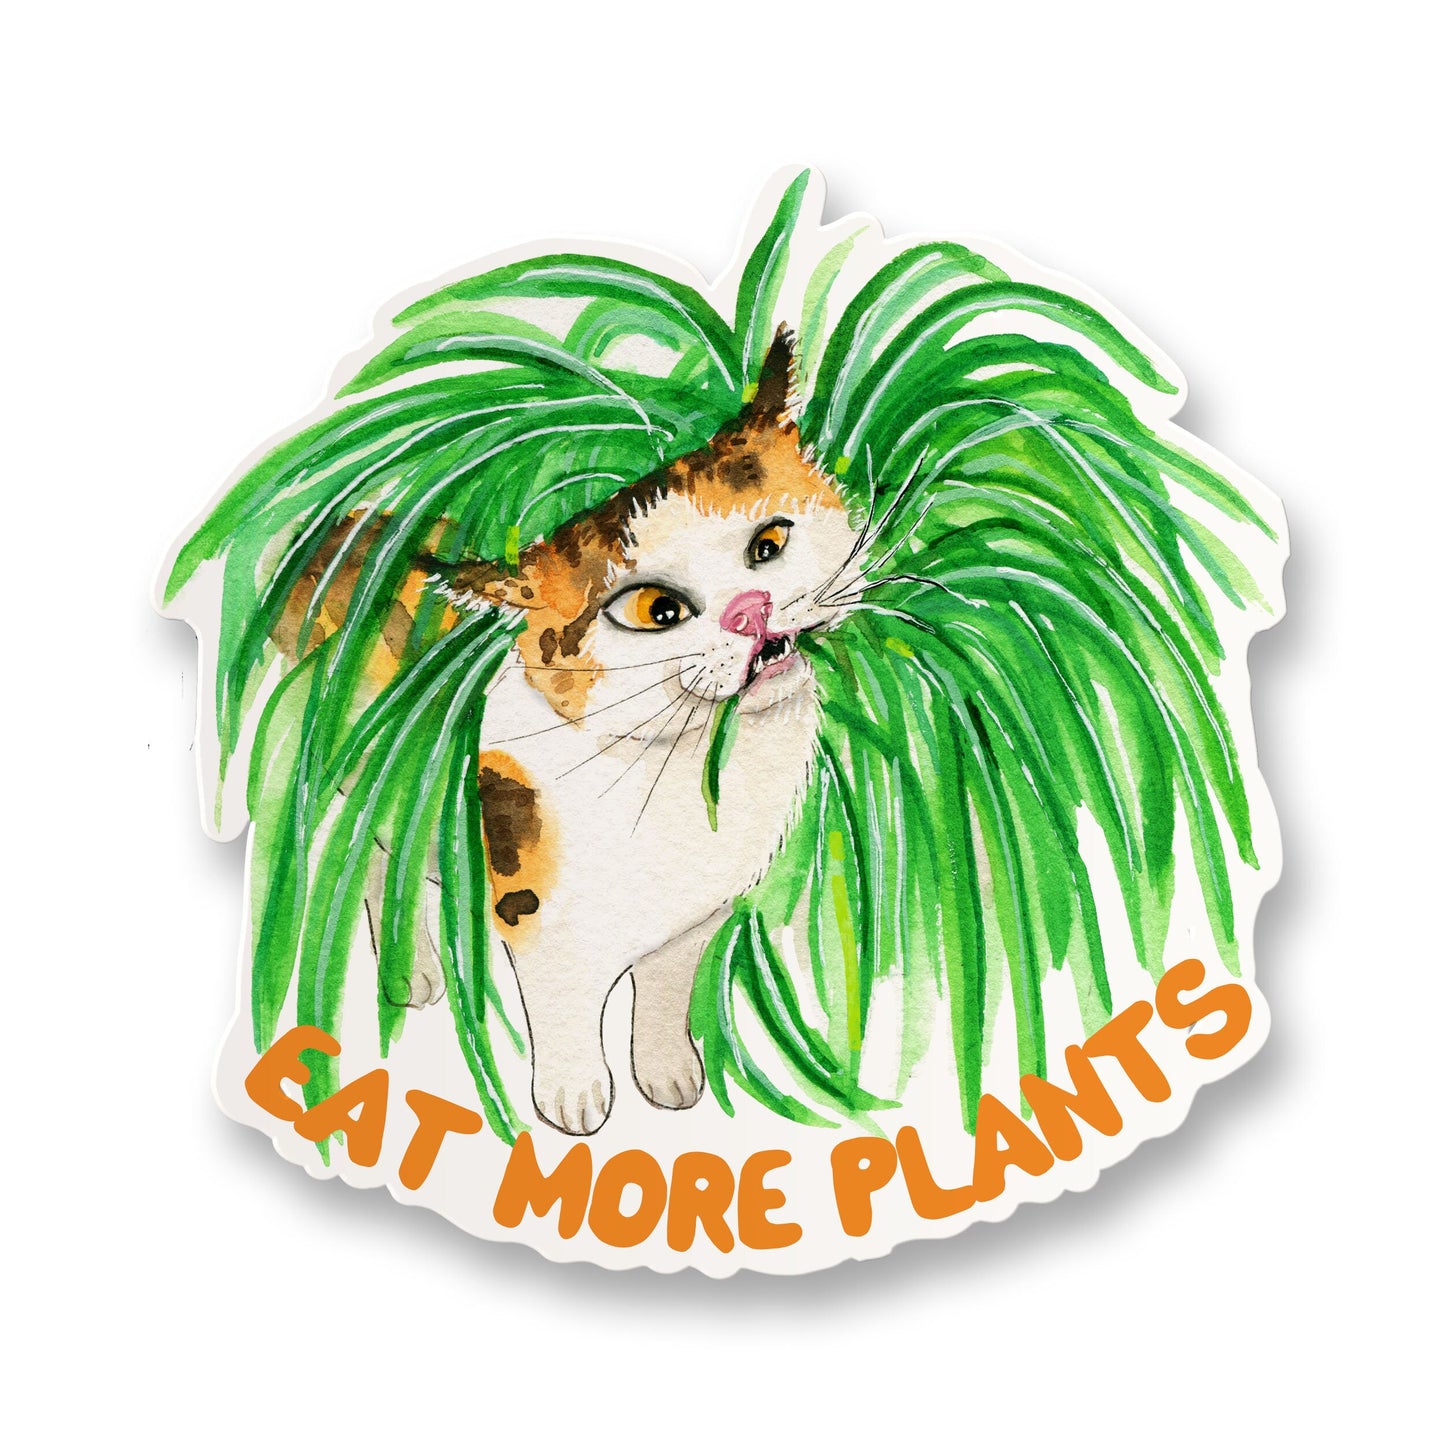 Eat More Plants Vegetarian Sticker For Plant Mom - Calico Cat Funny Waterproof Stickers For Vegan